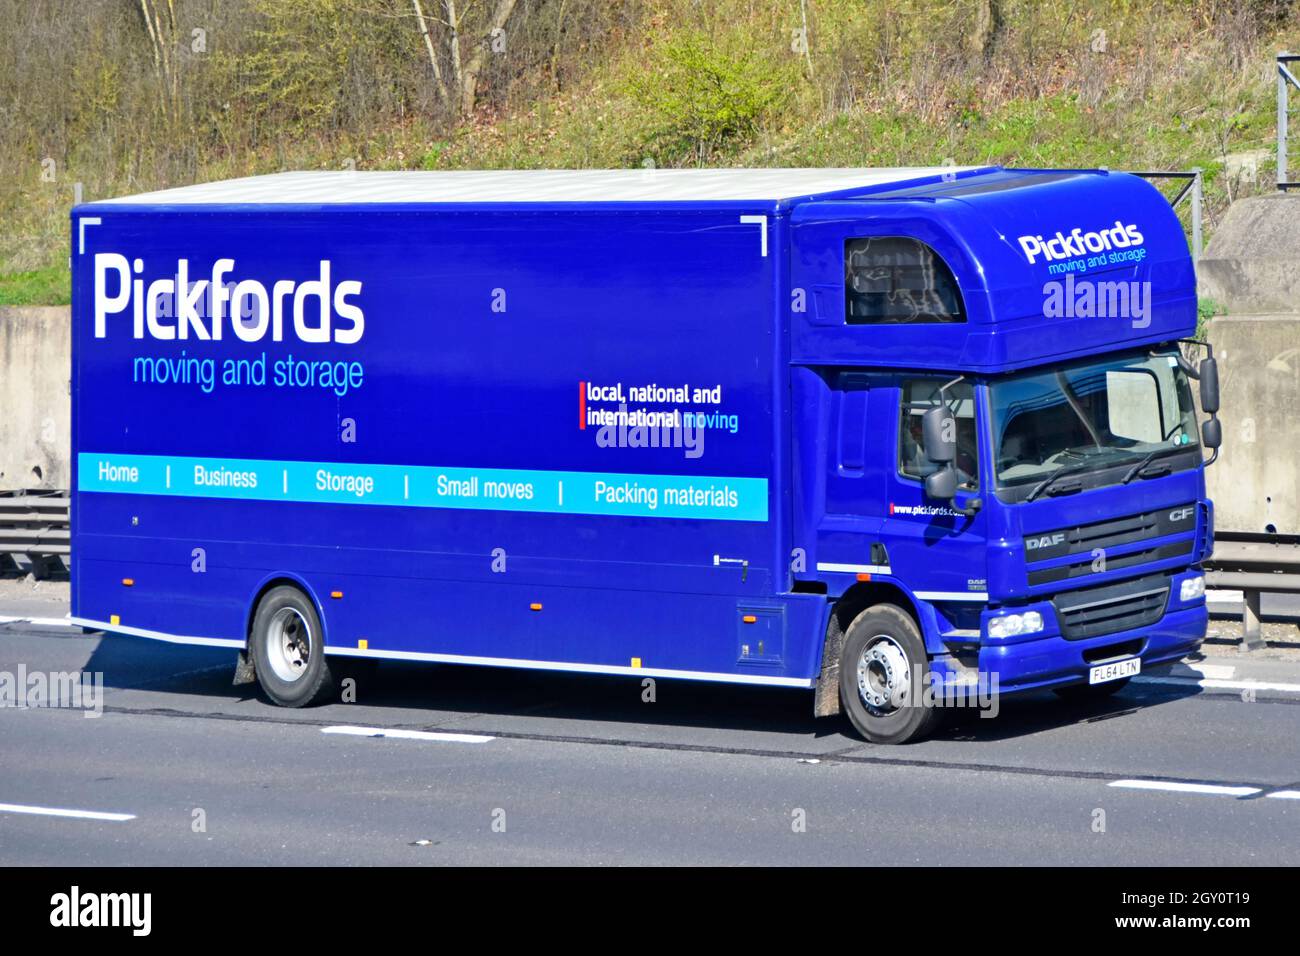 Close up branding & advertising on side & front view of rigid body blue Pickfords removal storage business lorry truck van & driver uk motorway road Stock Photo